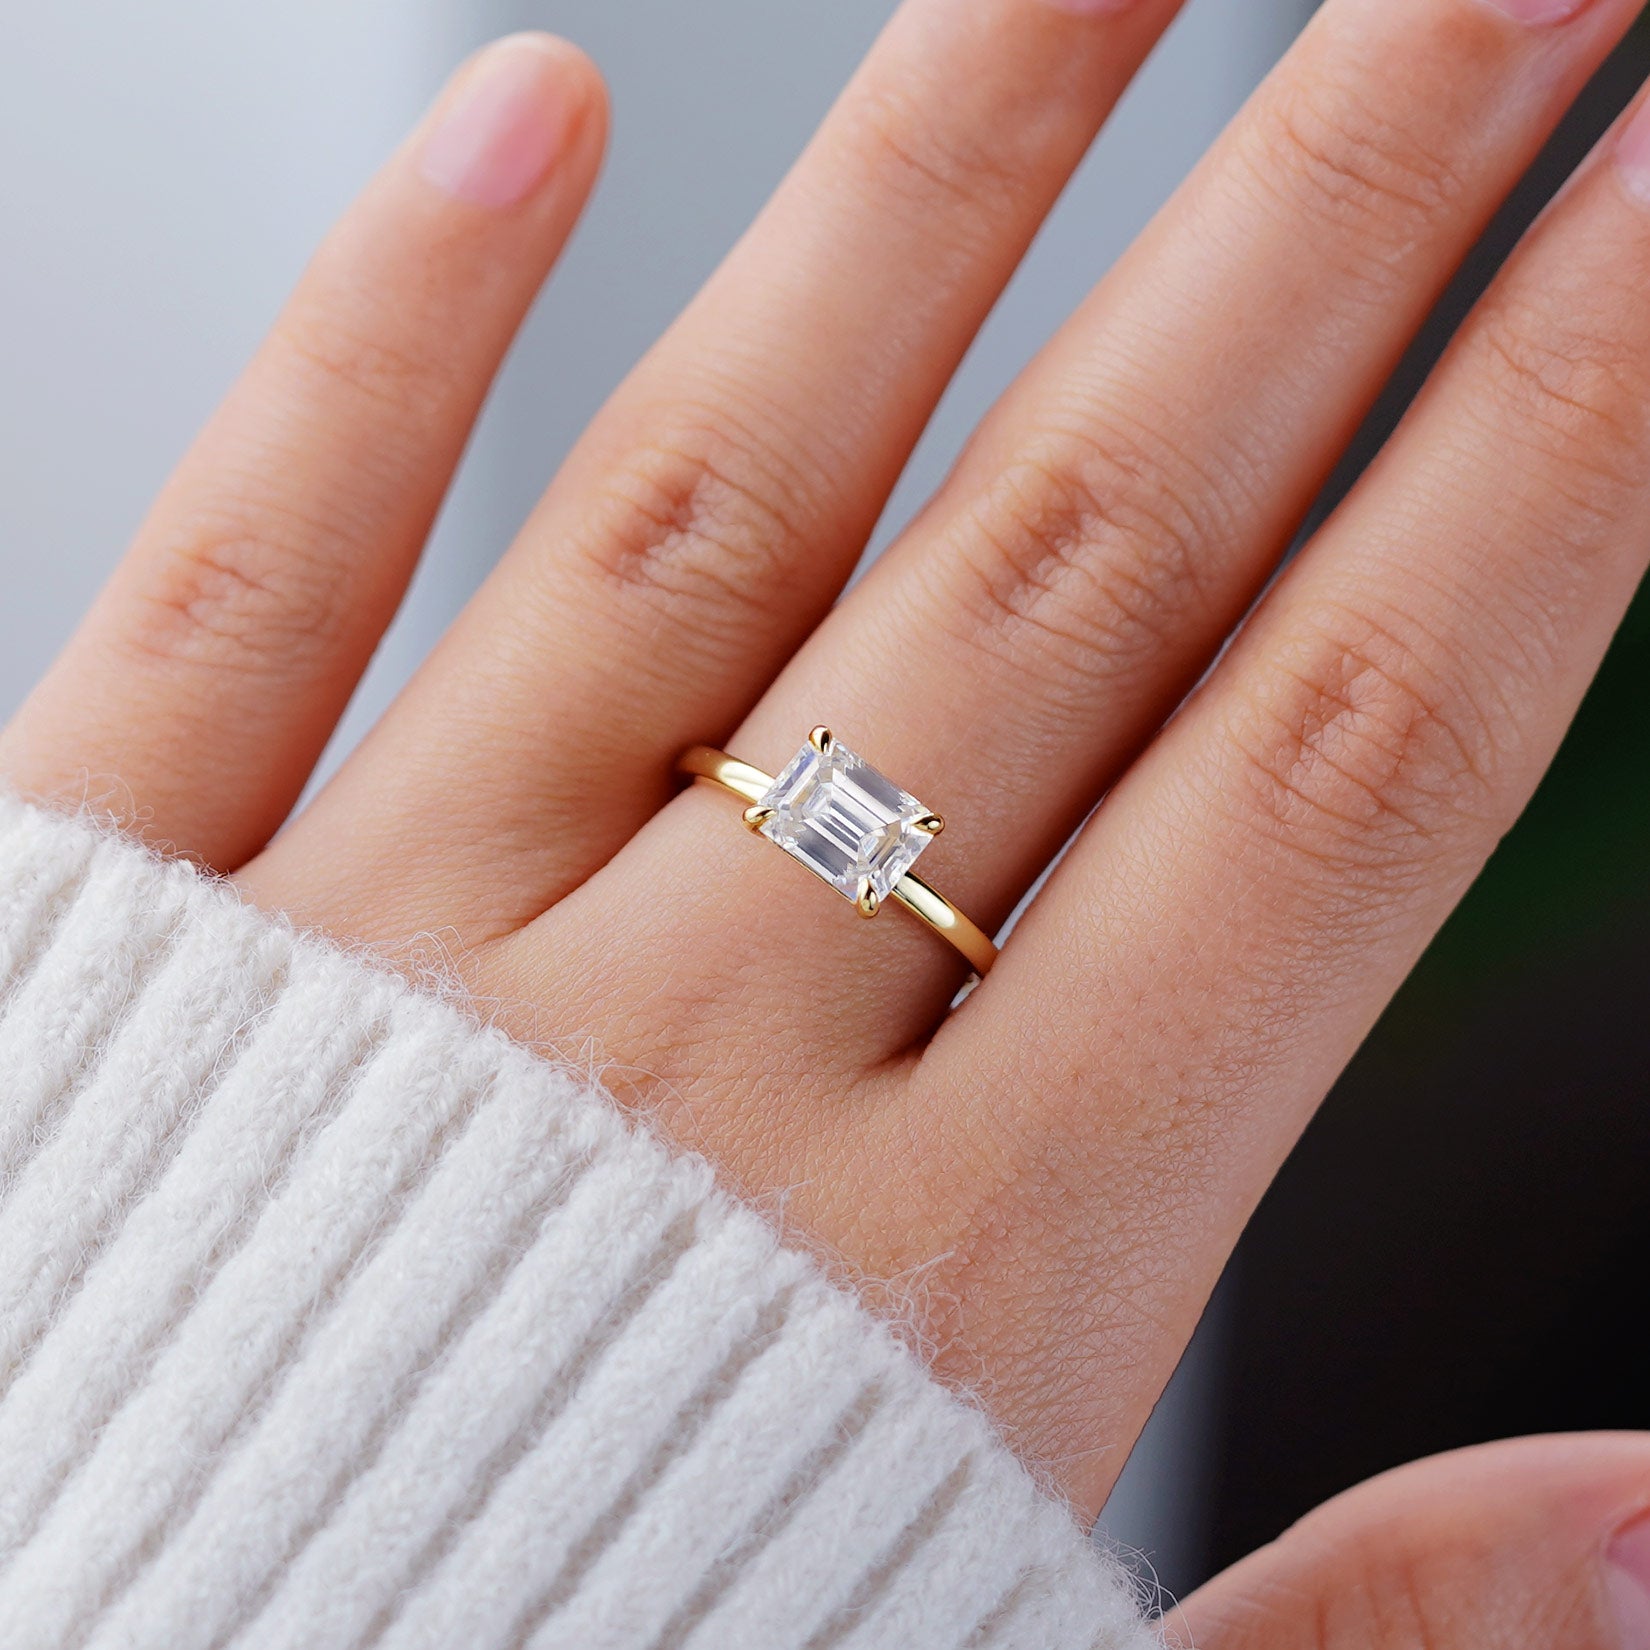 East-West Emerald Cut Solitaire Engagement Ring